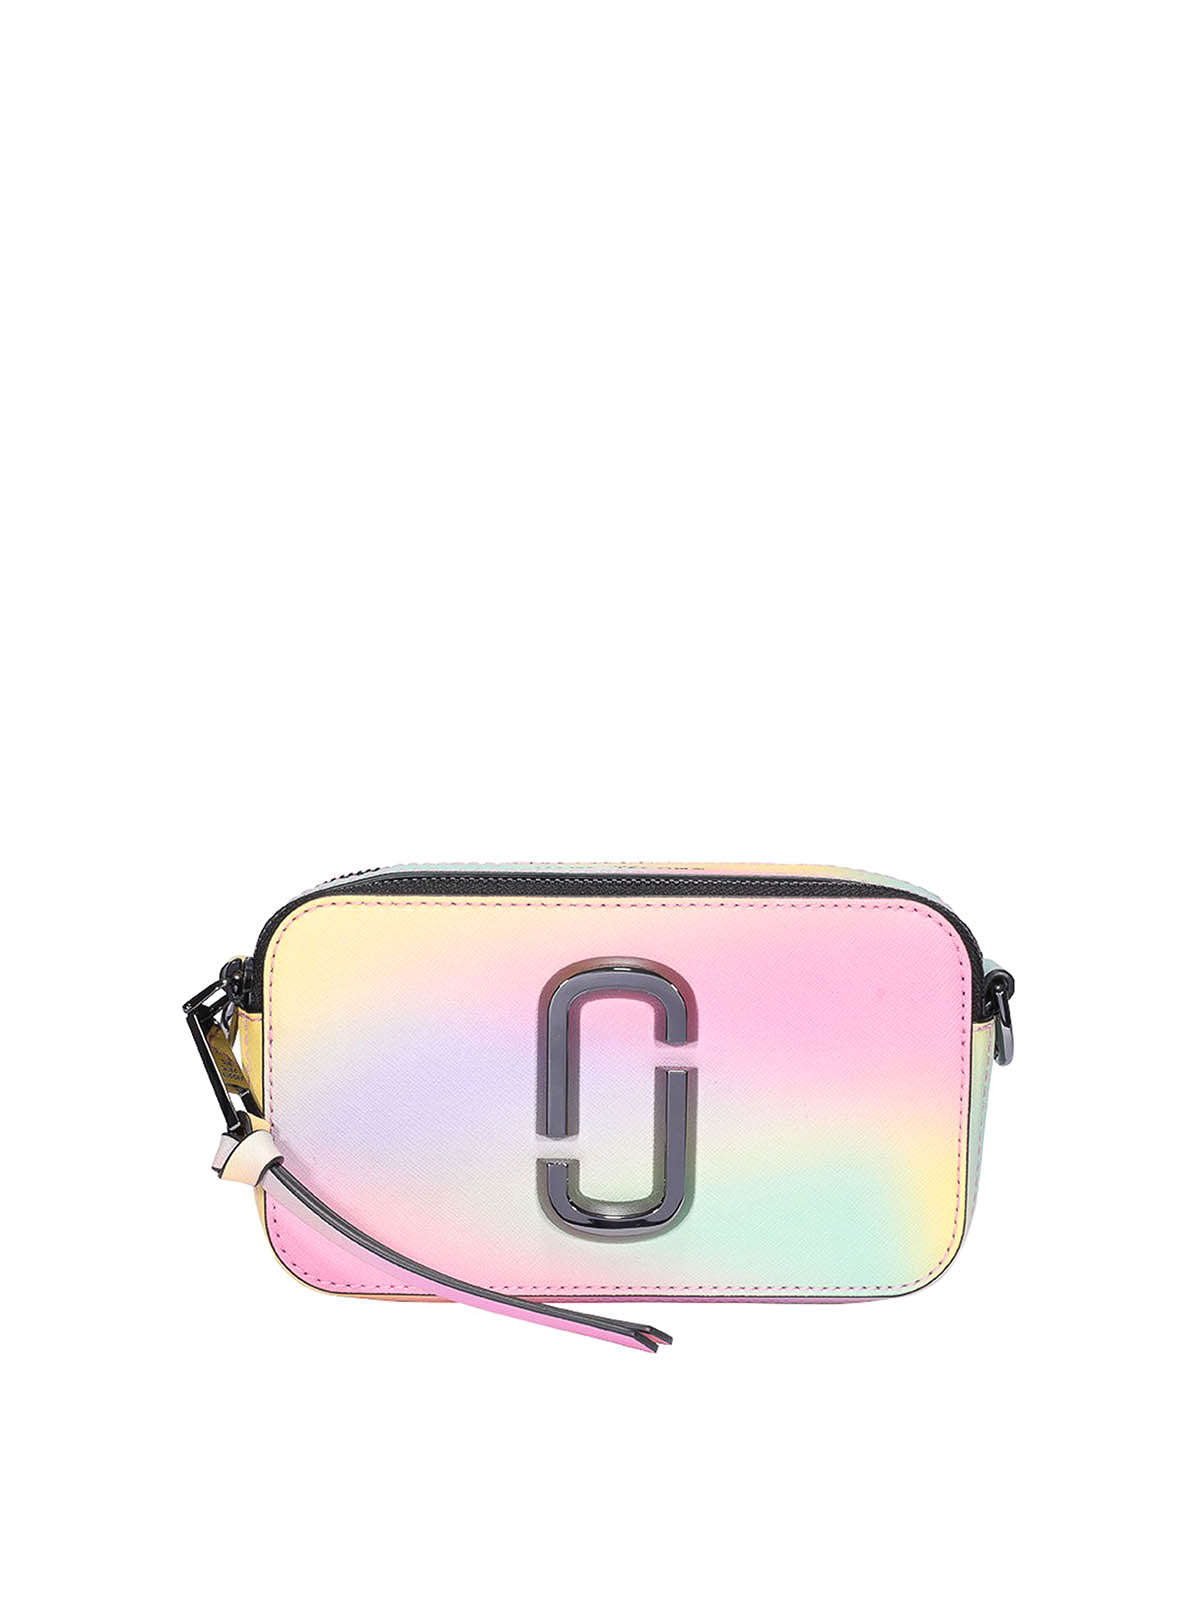 Marc Jacobs Snapshot Airbrushed Camera Bag in White